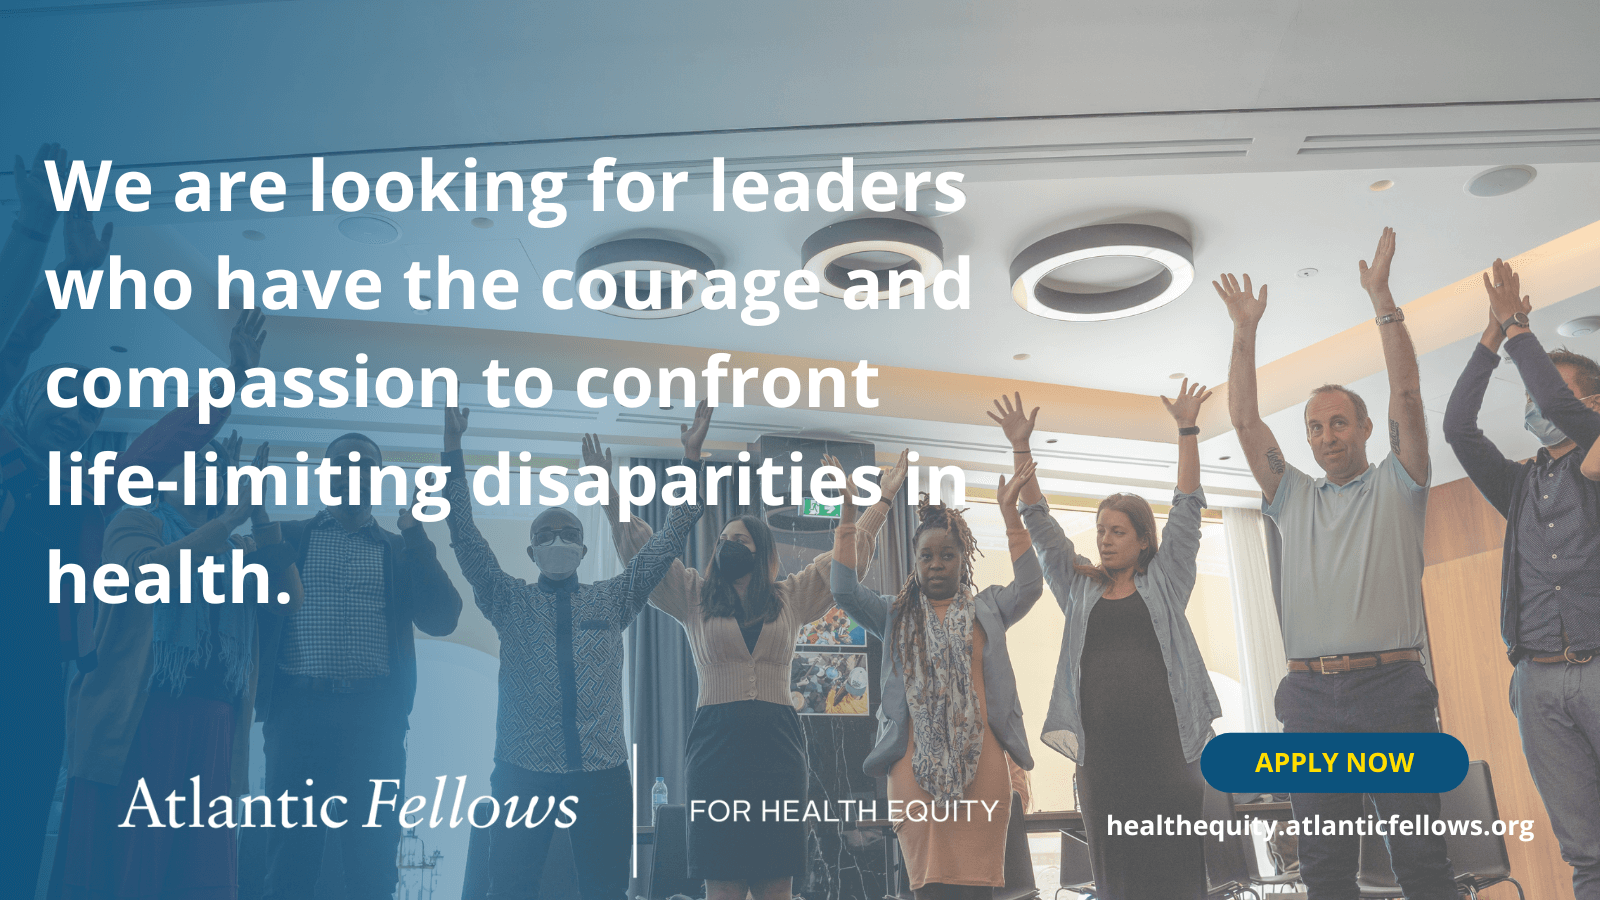 We are looking for leaders who have the courage and compassion to confront life-limiting disparities in health.